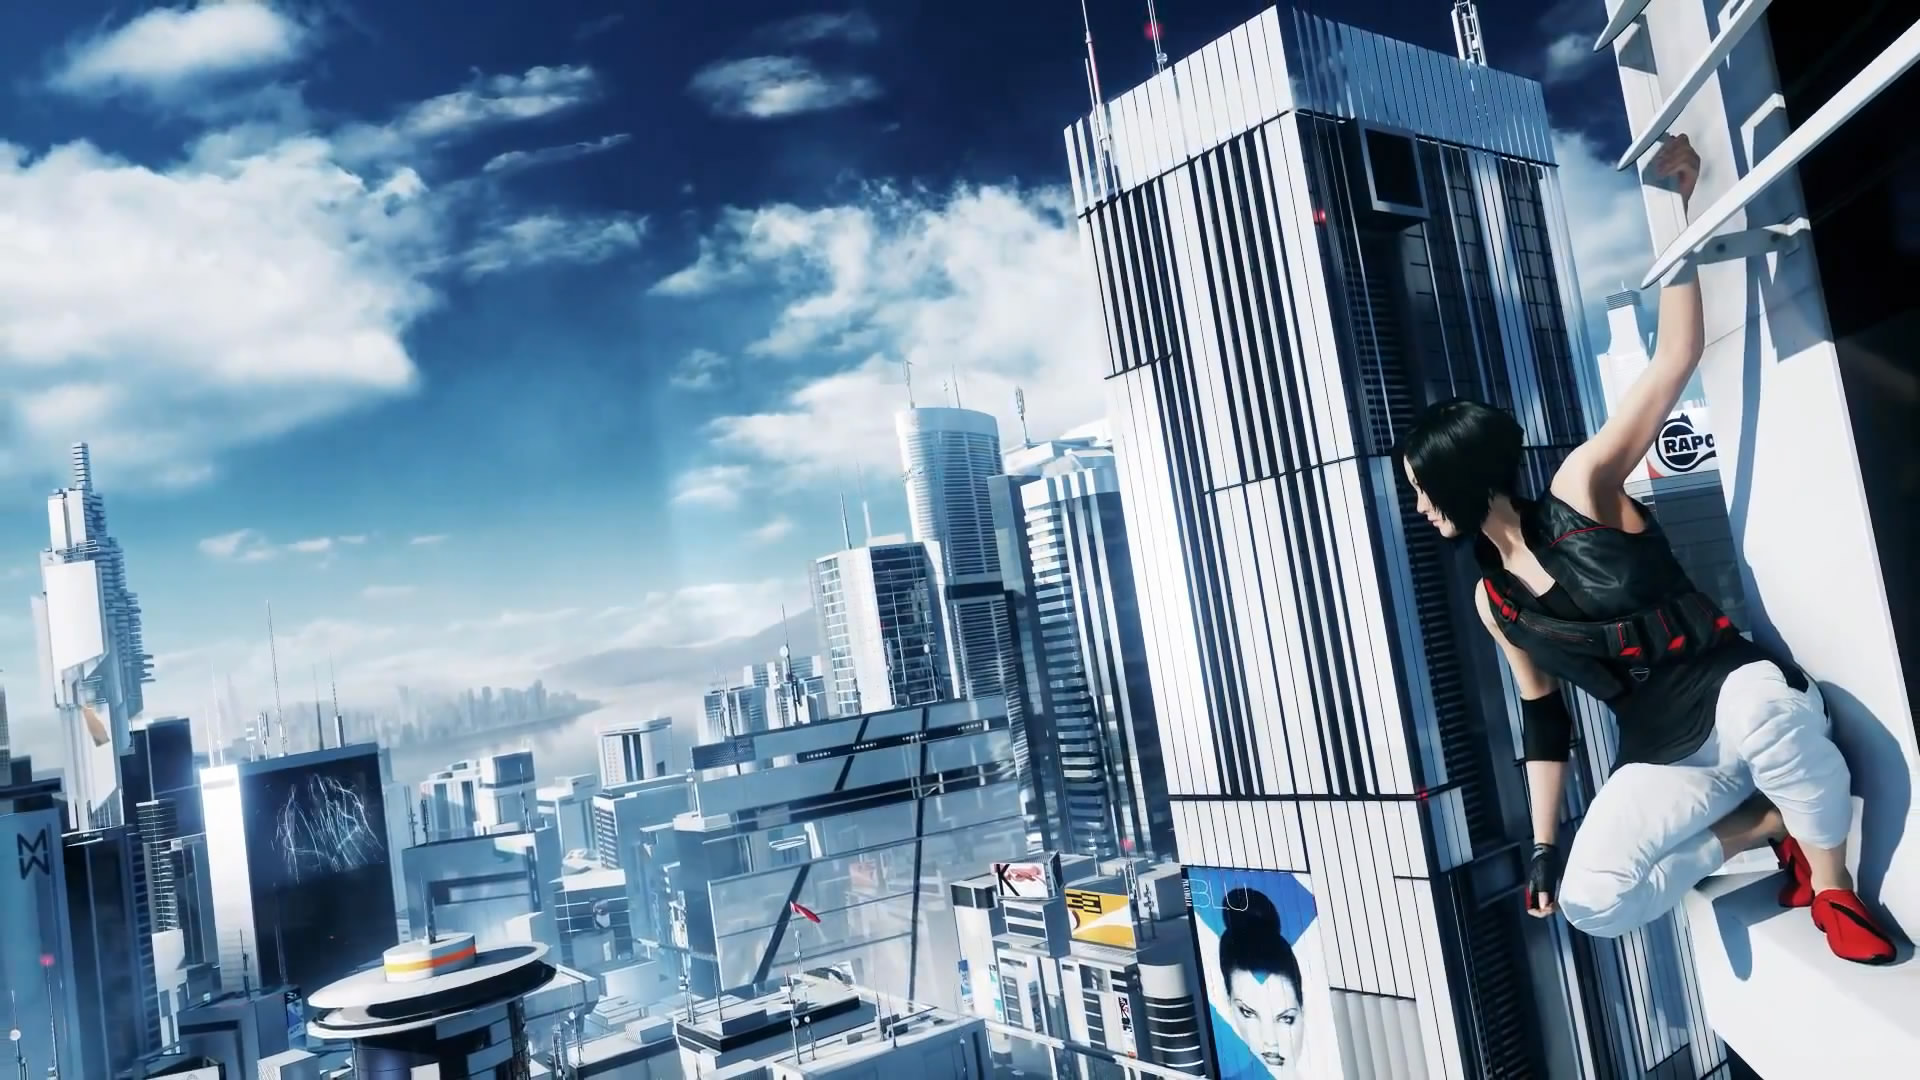 Wallpaper Of Mirrors Edge You Are Ing